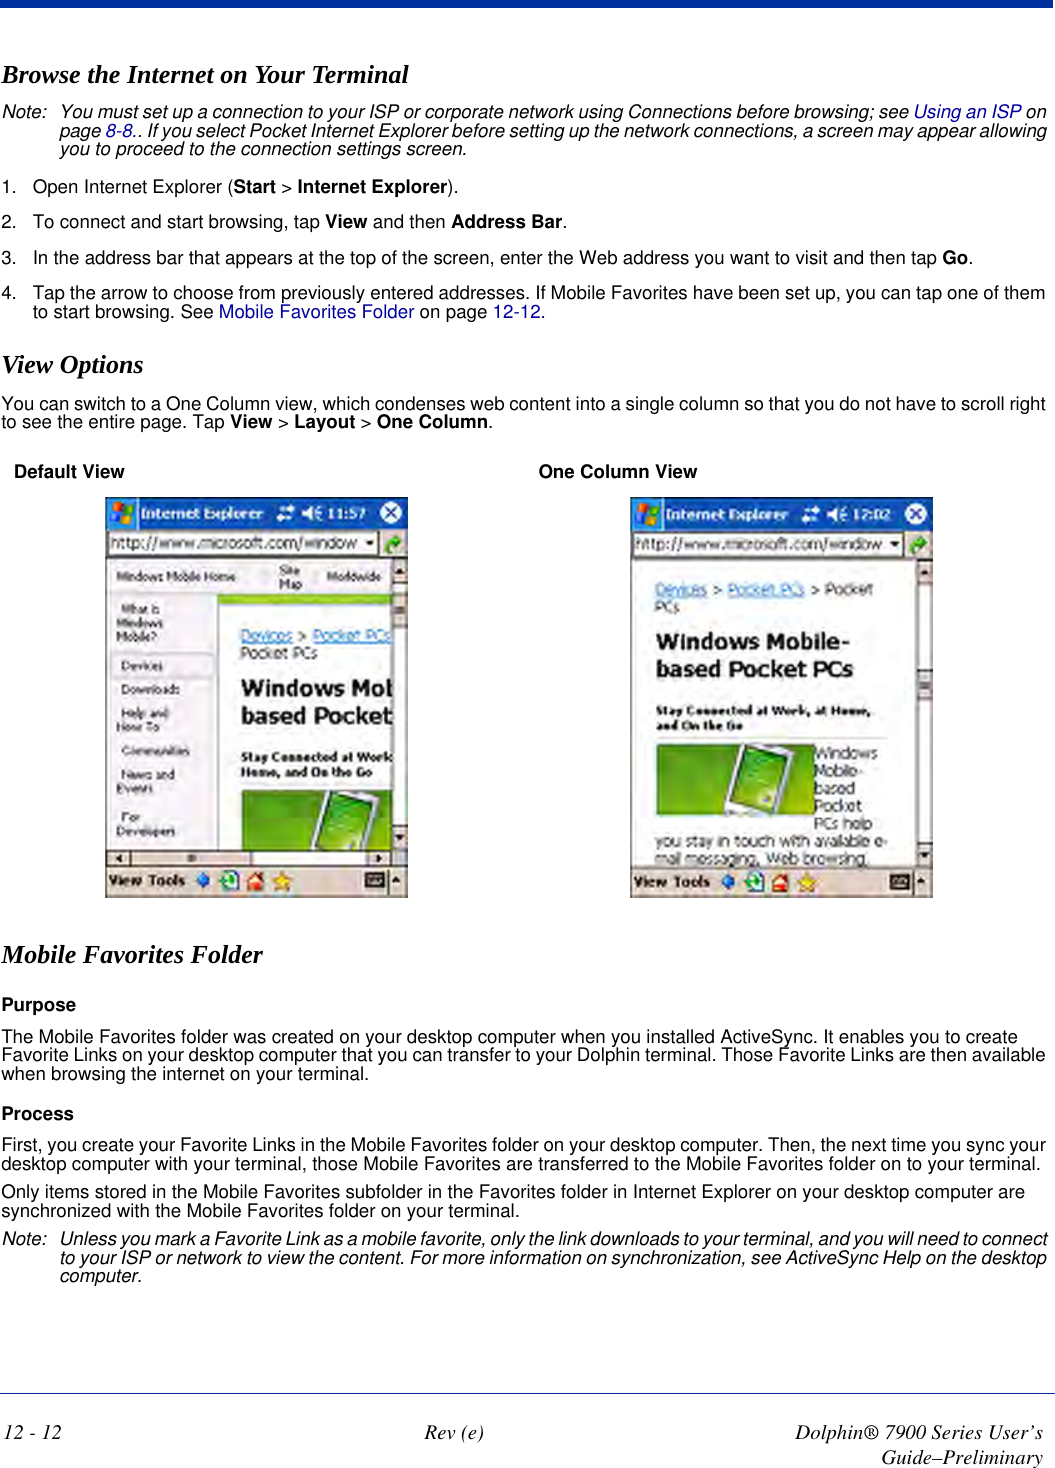 12 - 12 Rev (e) Dolphin® 7900 Series User’s Guide–PreliminaryBrowse the Internet on Your TerminalNote: You must set up a connection to your ISP or corporate network using Connections before browsing; see Using an ISP on page 8-8.. If you select Pocket Internet Explorer before setting up the network connections, a screen may appear allowing you to proceed to the connection settings screen. 1. Open Internet Explorer (Start &gt; Internet Explorer).2. To connect and start browsing, tap View and then Address Bar. 3. In the address bar that appears at the top of the screen, enter the Web address you want to visit and then tap Go. 4. Tap the arrow to choose from previously entered addresses. If Mobile Favorites have been set up, you can tap one of them to start browsing. See Mobile Favorites Folder on page 12-12. View OptionsYou can switch to a One Column view, which condenses web content into a single column so that you do not have to scroll right to see the entire page. Tap View &gt; Layout &gt; One Column.Default View  One Column View Mobile Favorites FolderPurposeThe Mobile Favorites folder was created on your desktop computer when you installed ActiveSync. It enables you to create Favorite Links on your desktop computer that you can transfer to your Dolphin terminal. Those Favorite Links are then available when browsing the internet on your terminal. ProcessFirst, you create your Favorite Links in the Mobile Favorites folder on your desktop computer. Then, the next time you sync your desktop computer with your terminal, those Mobile Favorites are transferred to the Mobile Favorites folder on to your terminal. Only items stored in the Mobile Favorites subfolder in the Favorites folder in Internet Explorer on your desktop computer are synchronized with the Mobile Favorites folder on your terminal. Note: Unless you mark a Favorite Link as a mobile favorite, only the link downloads to your terminal, and you will need to connect to your ISP or network to view the content. For more information on synchronization, see ActiveSync Help on the desktop computer.